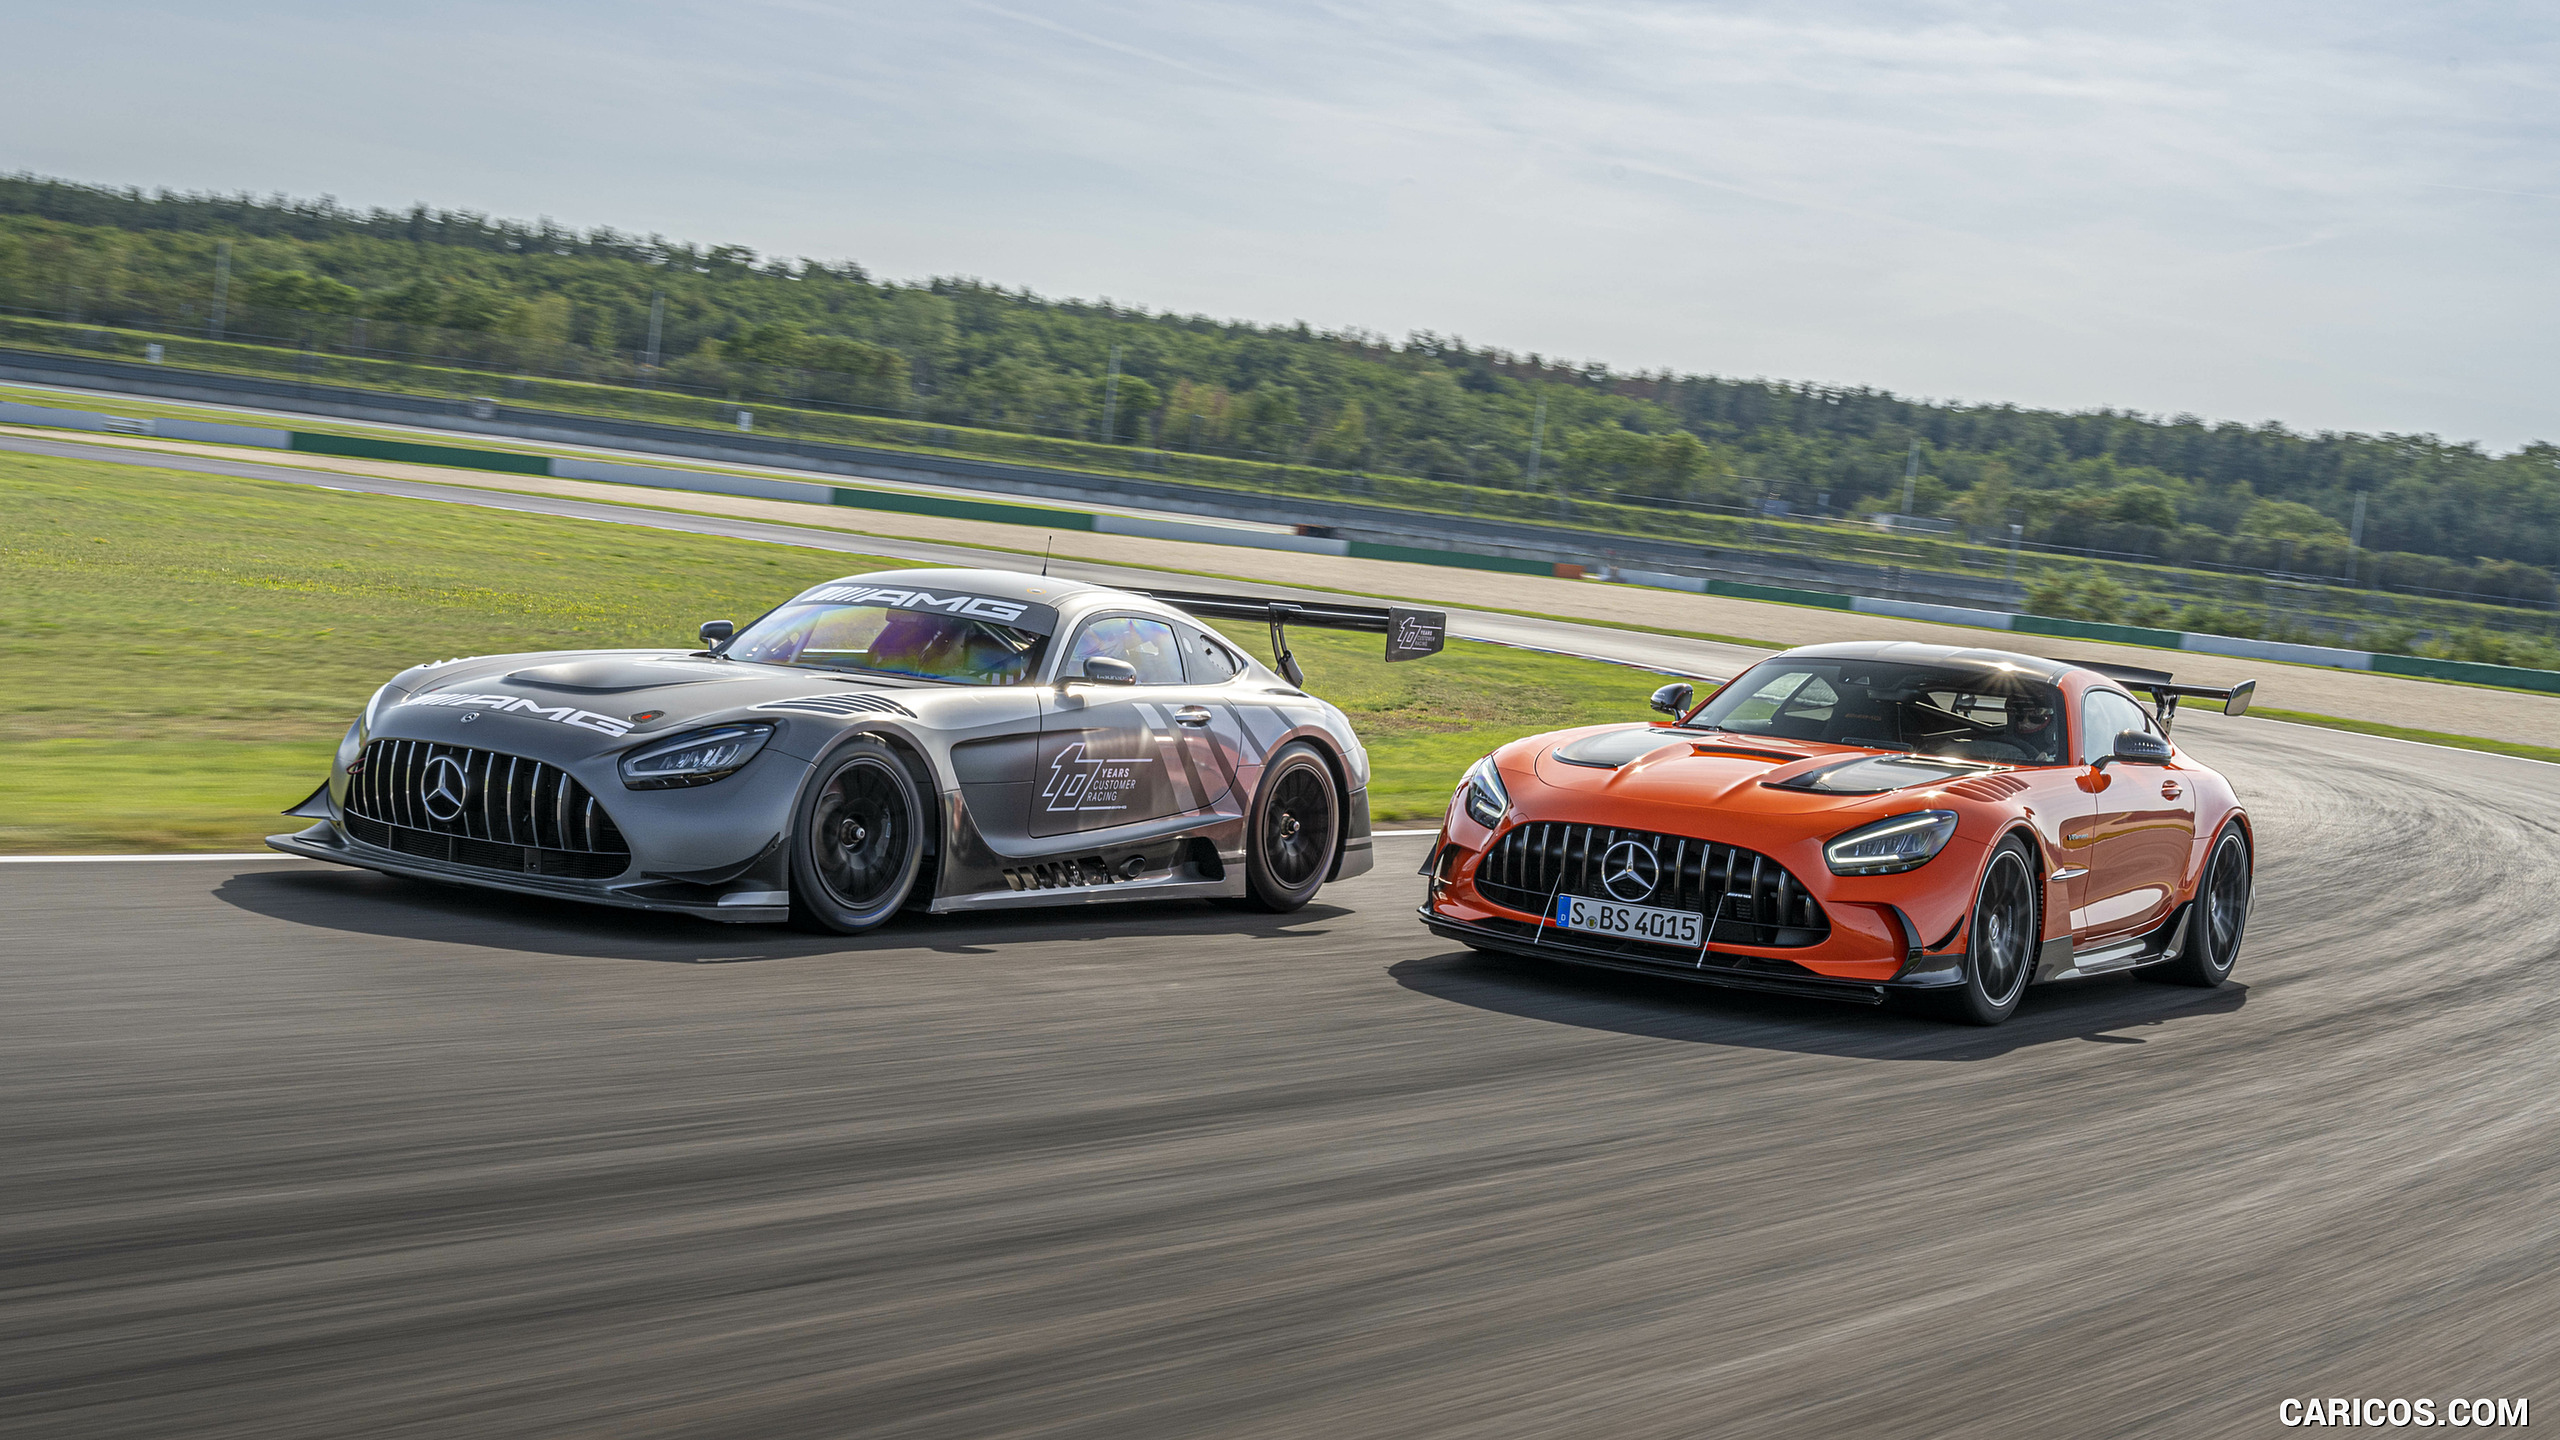 2021 Mercedes-AMG GT Black Series (Color: Magma Beam) and AMG GT3 Racing Car, #138 of 215